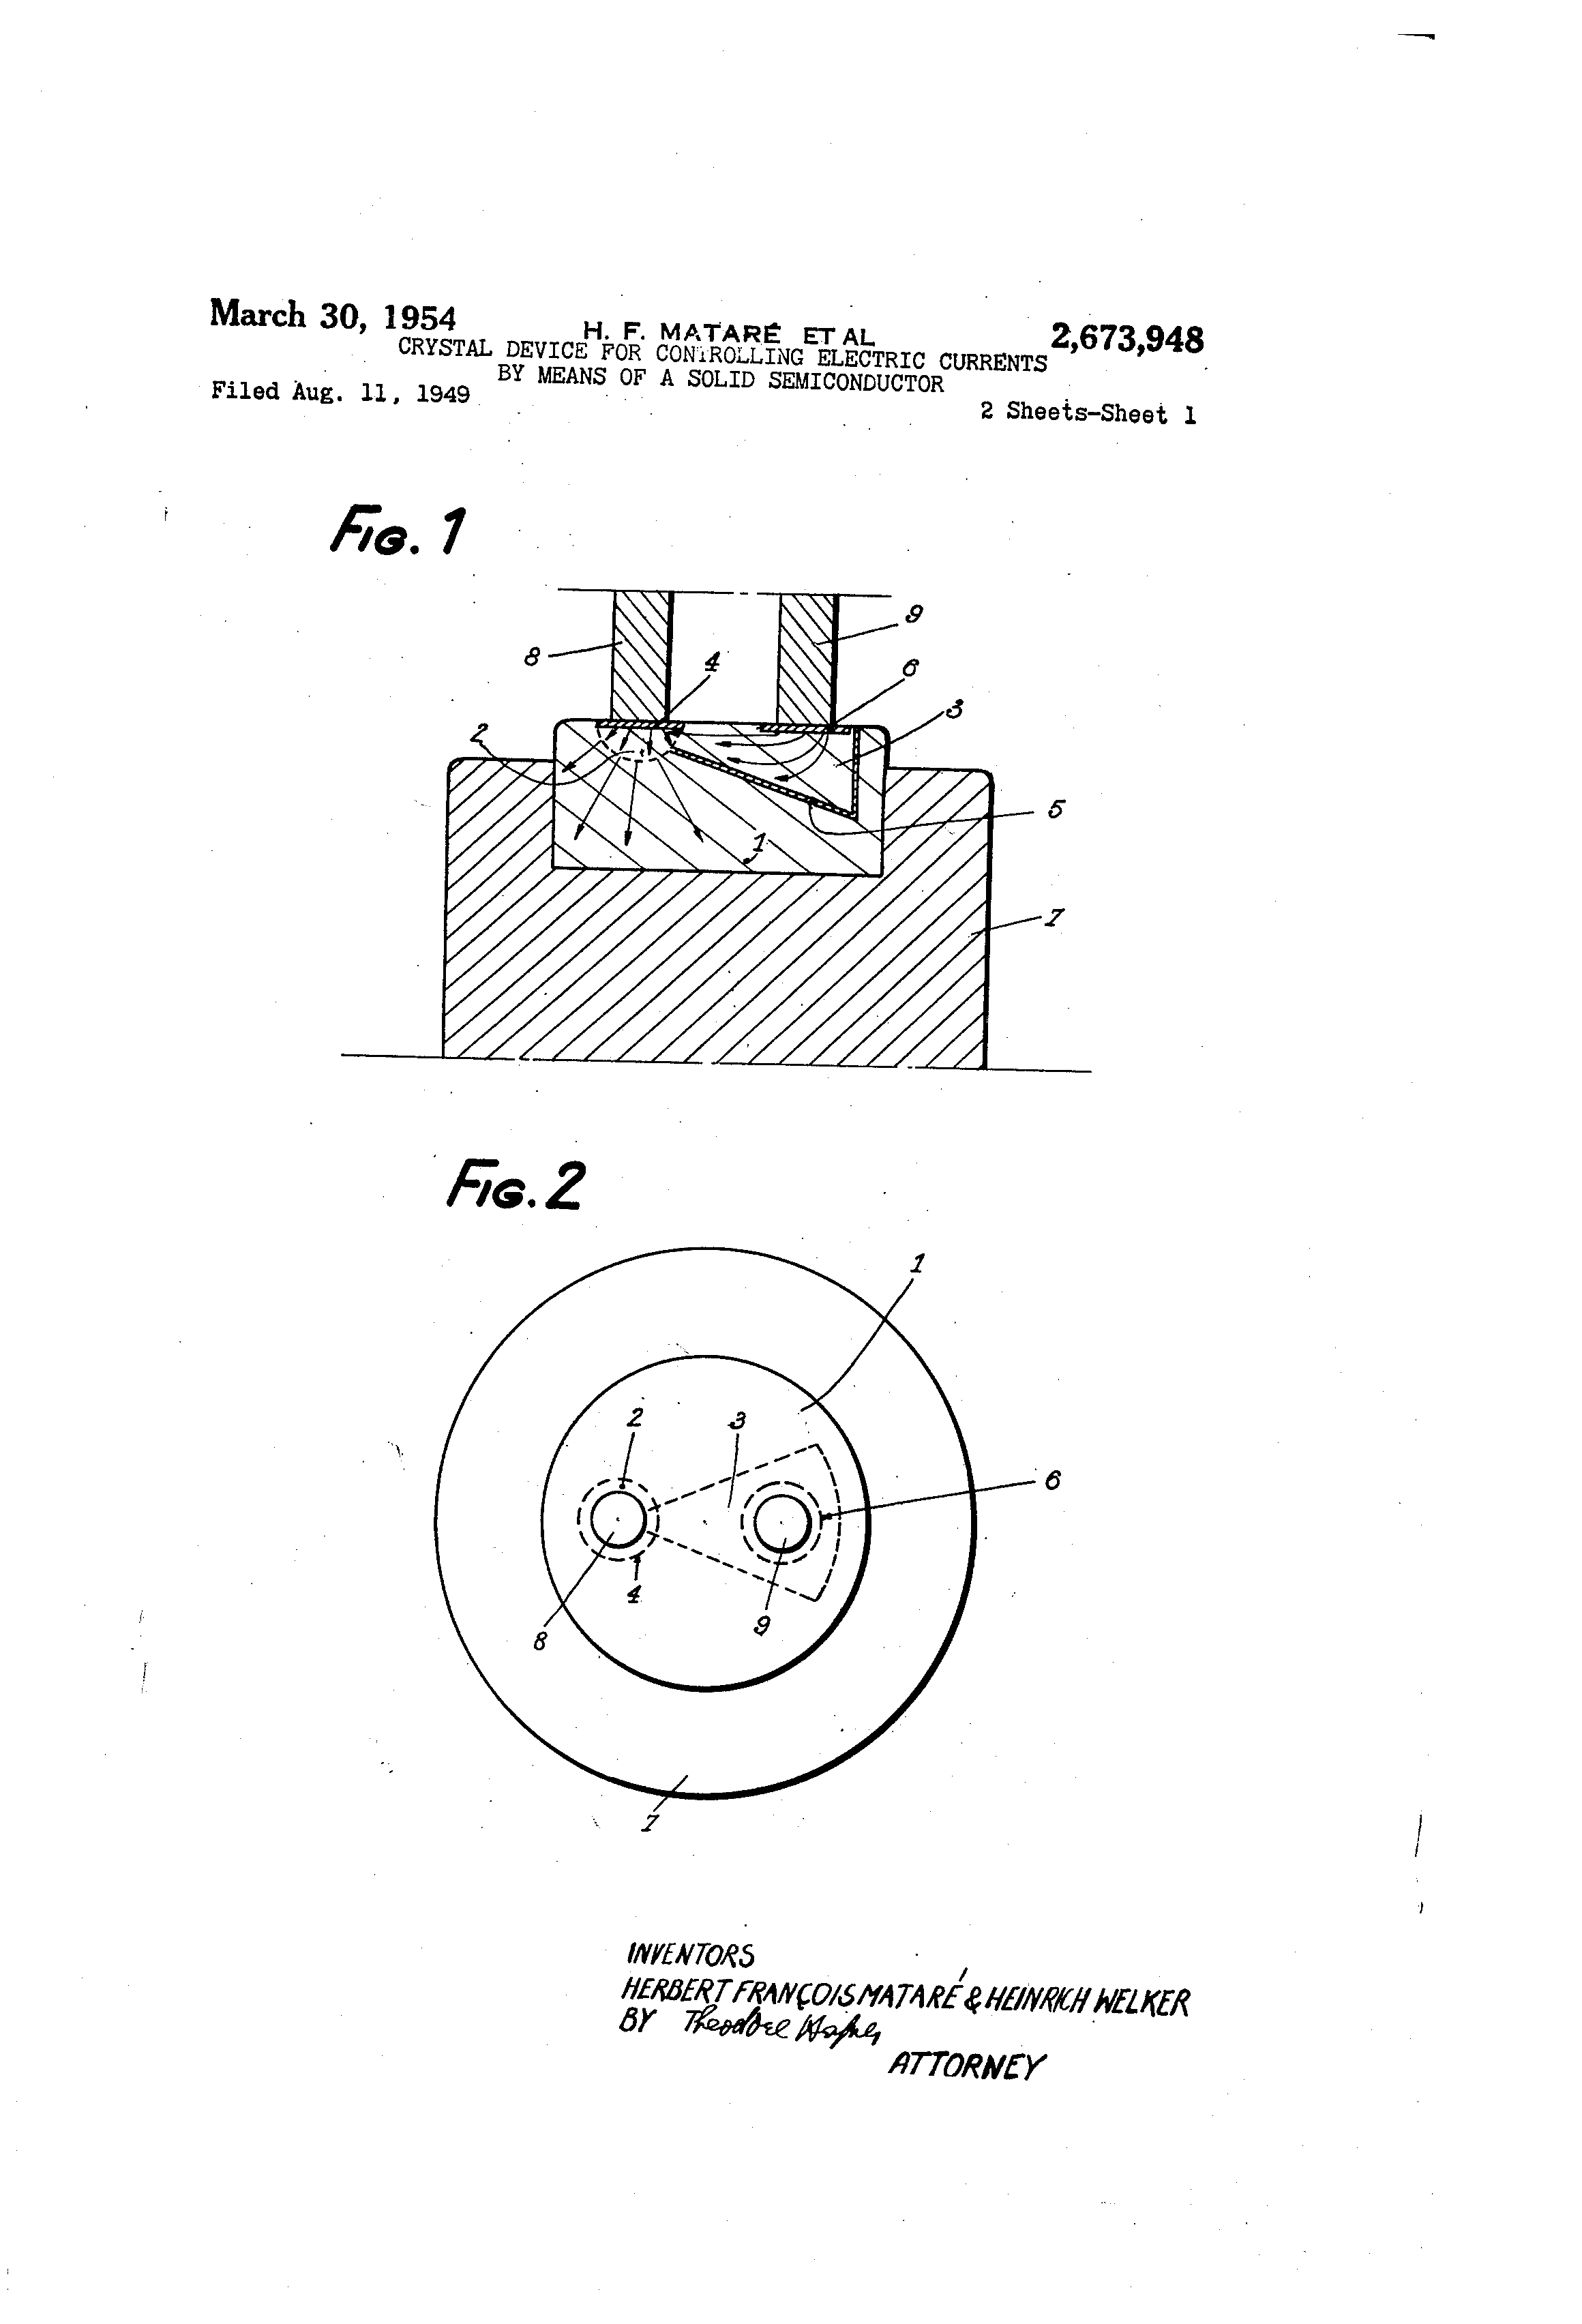 1954-03-30 (Matare Welker) Crystal device for controlling electric currents by m.png